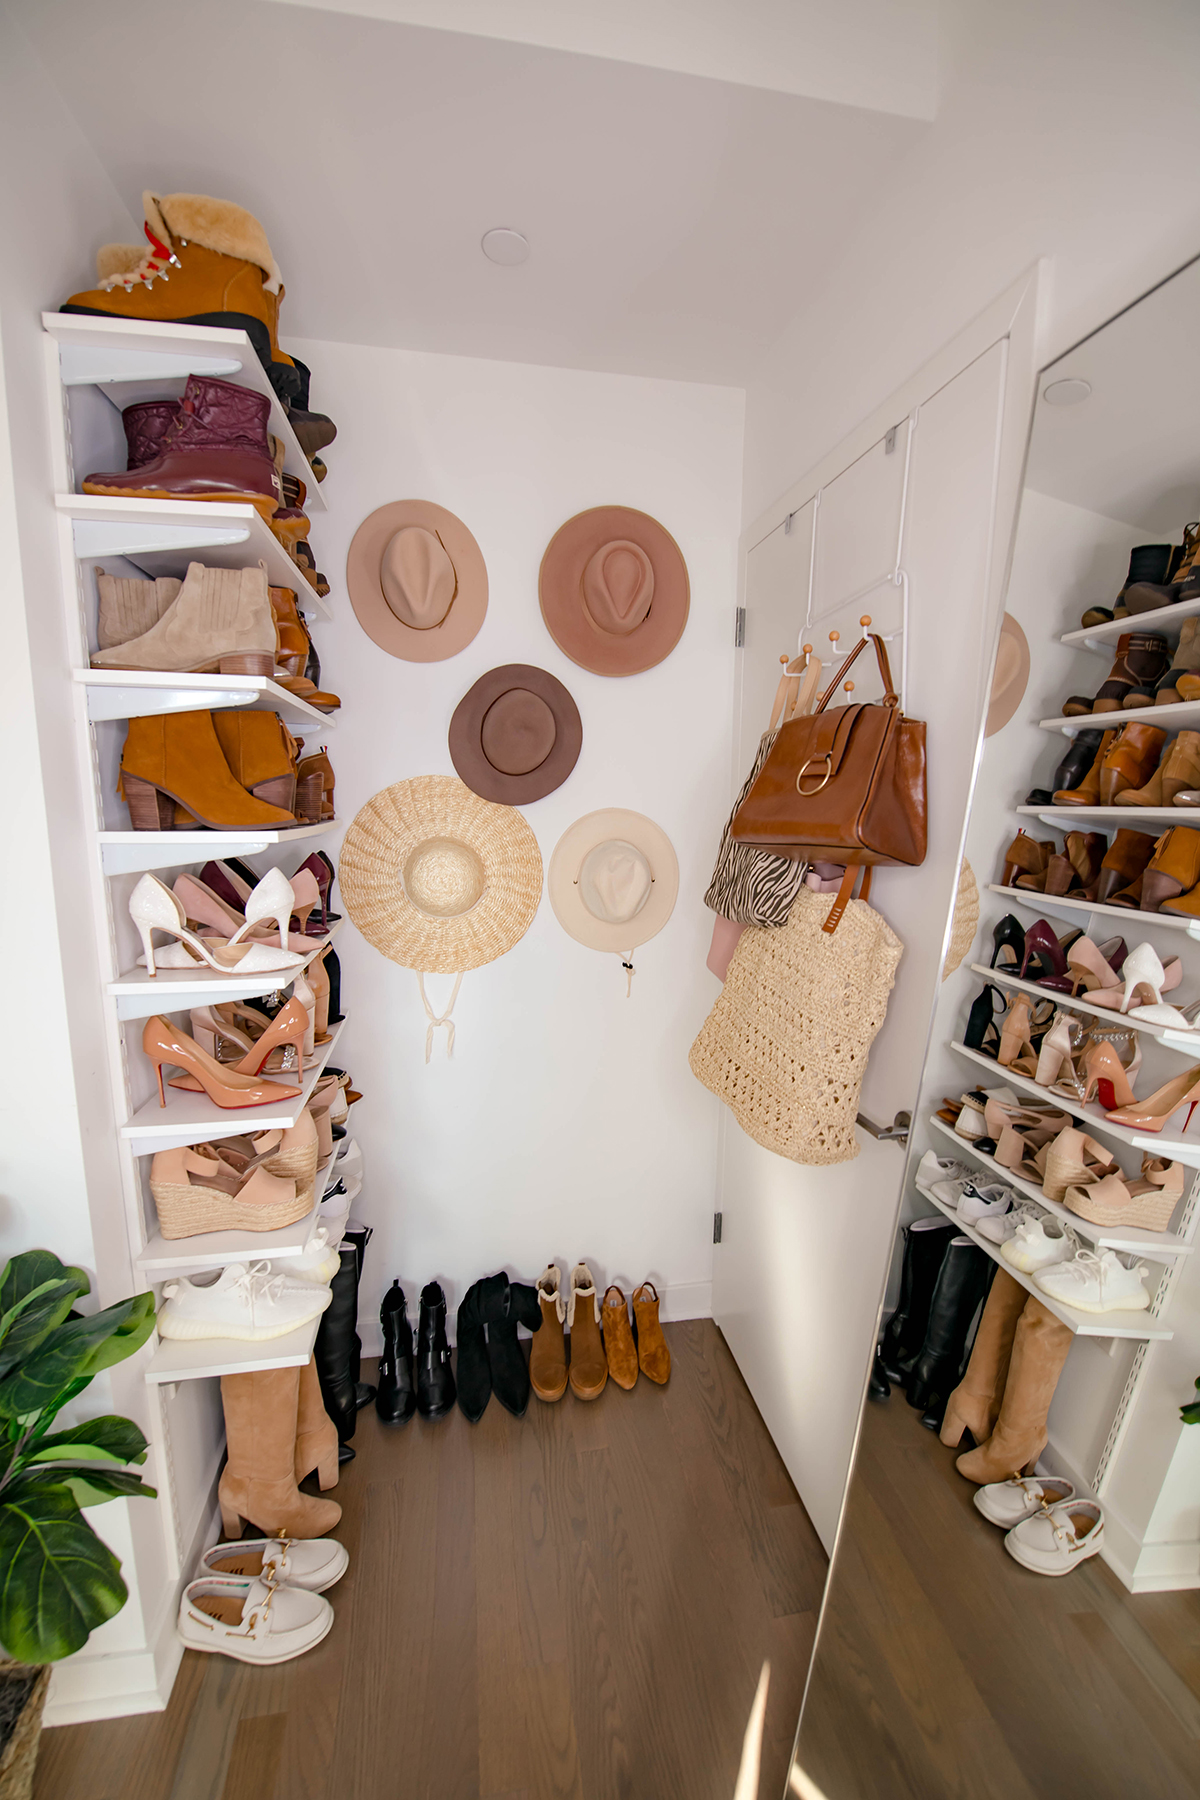 How To Hang Shoe Shelves + A Hat Wall - Katie's Bliss